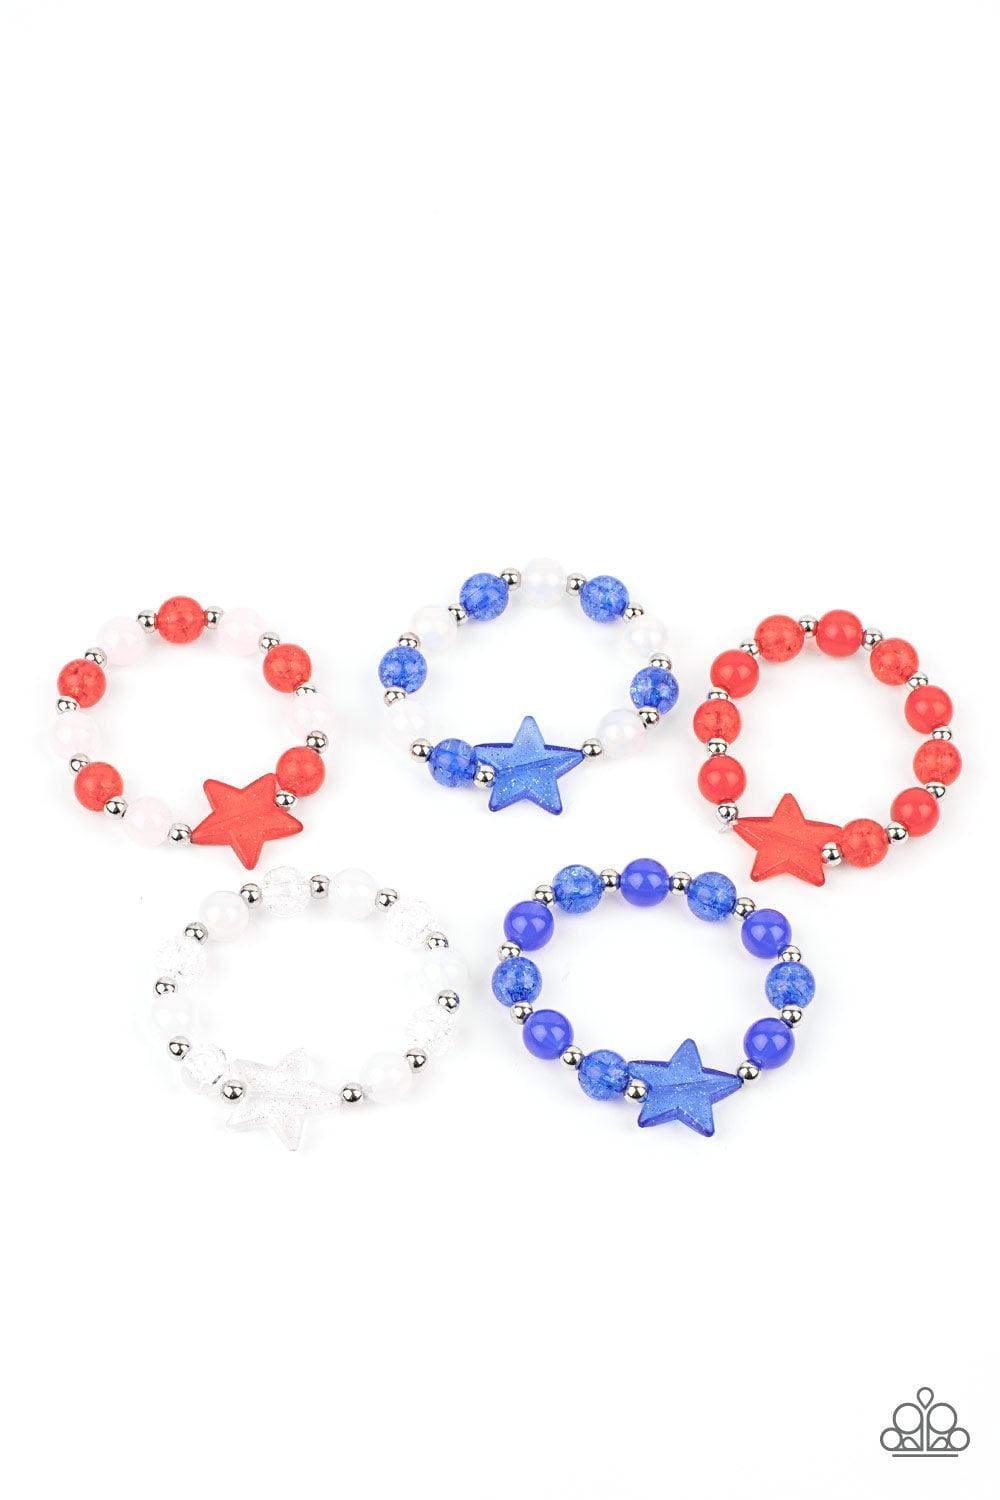 Paparazzi Accessories - Paparazzi Starlet Shimmer Jewelry - Red, White & Blue Stars Beaded Bracelets - Bling by JessieK